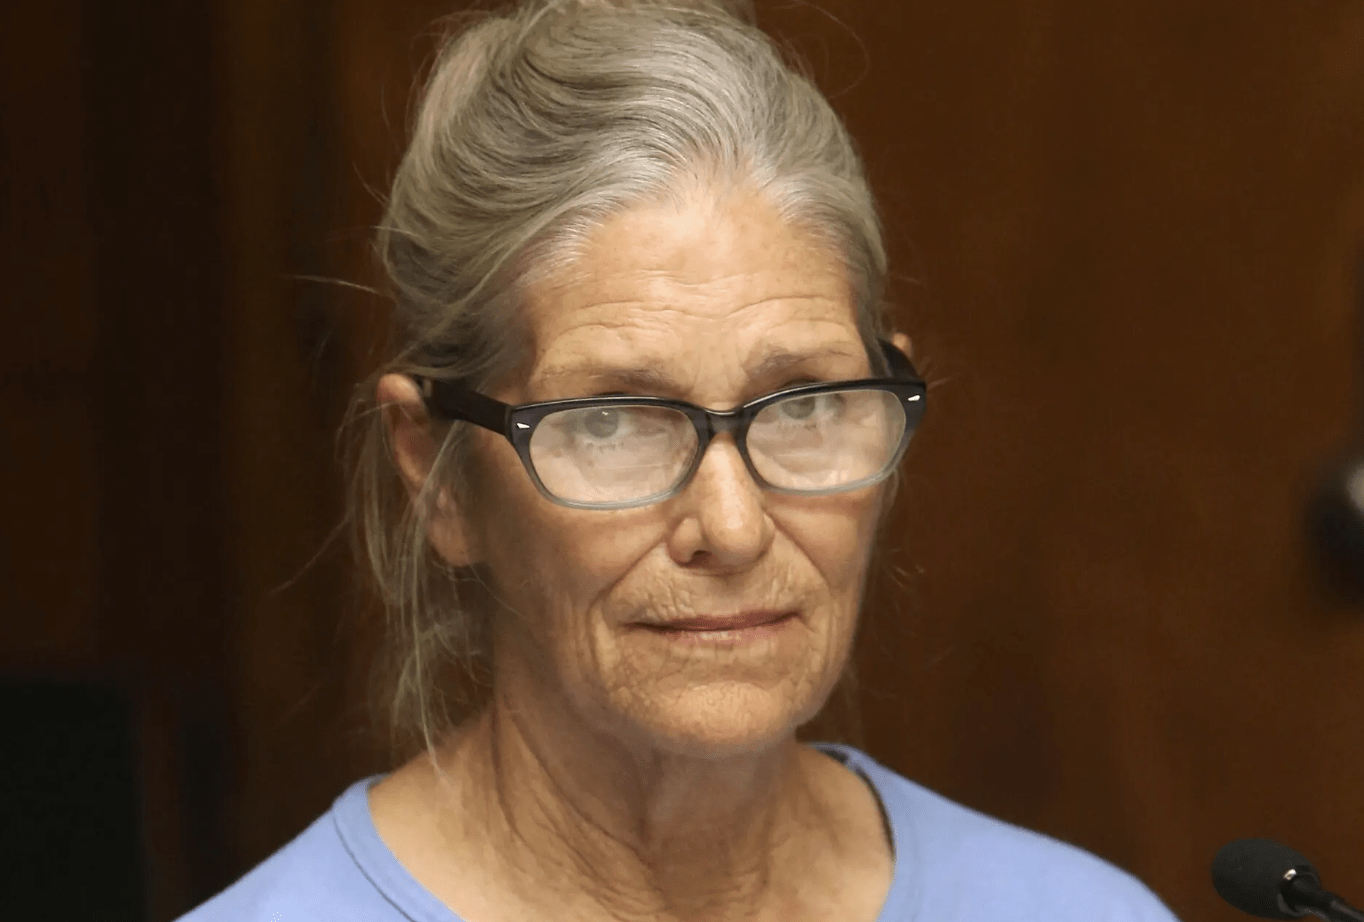 Leslie Van Houten attends her parole hearing at the California Institution for Women Sept. 6, 2017, in Corona, Calif.